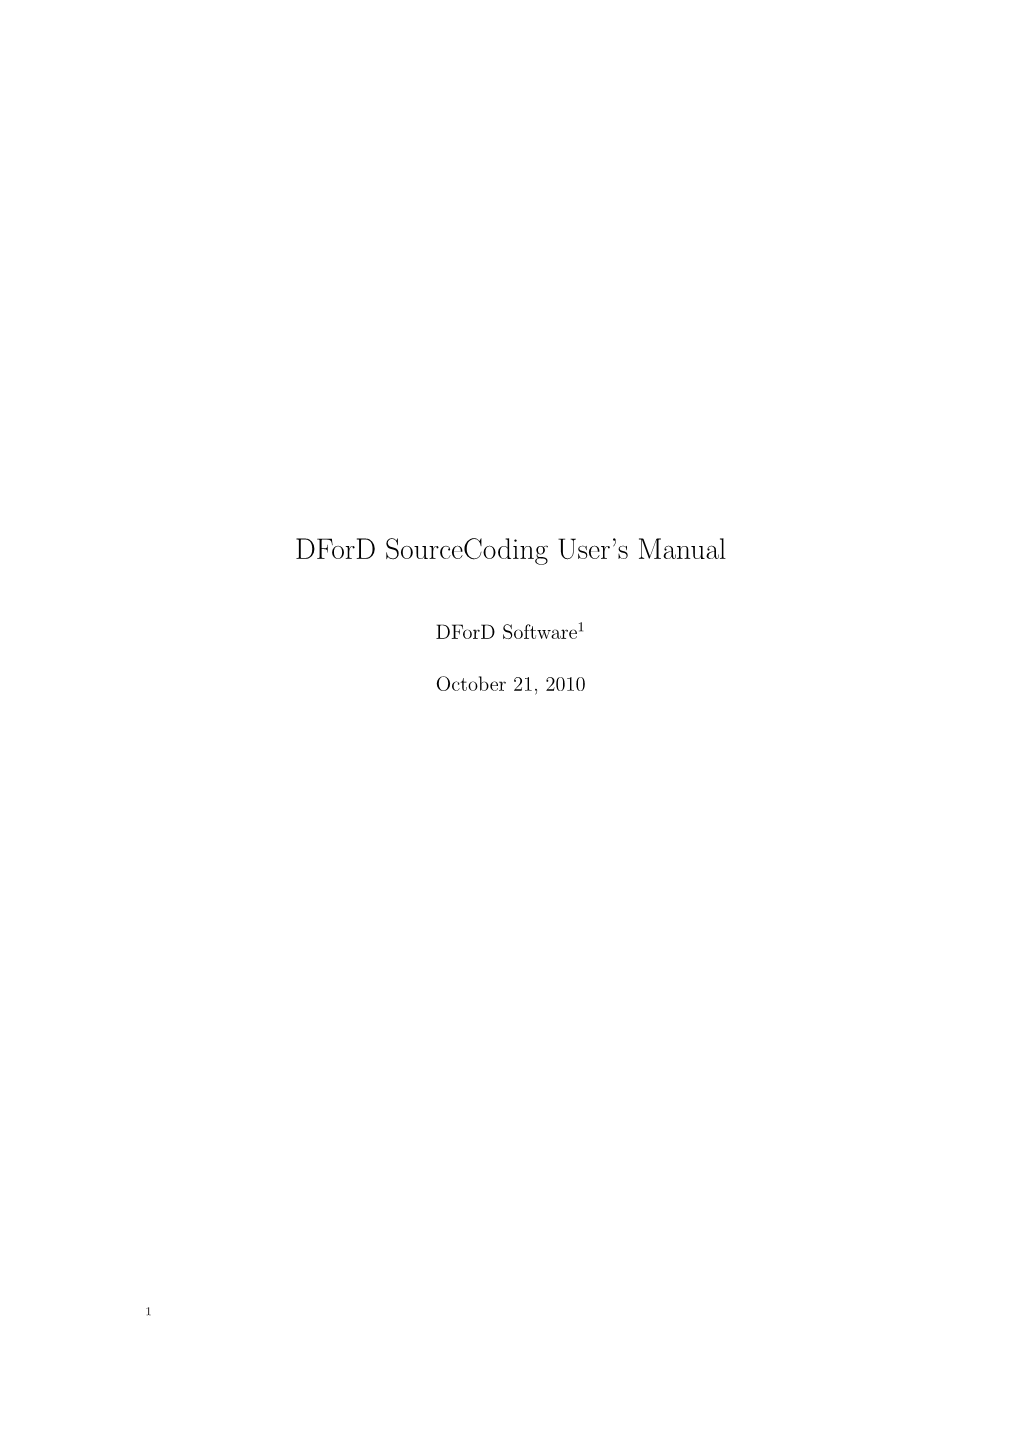 Dford Sourcecoding User's Manual